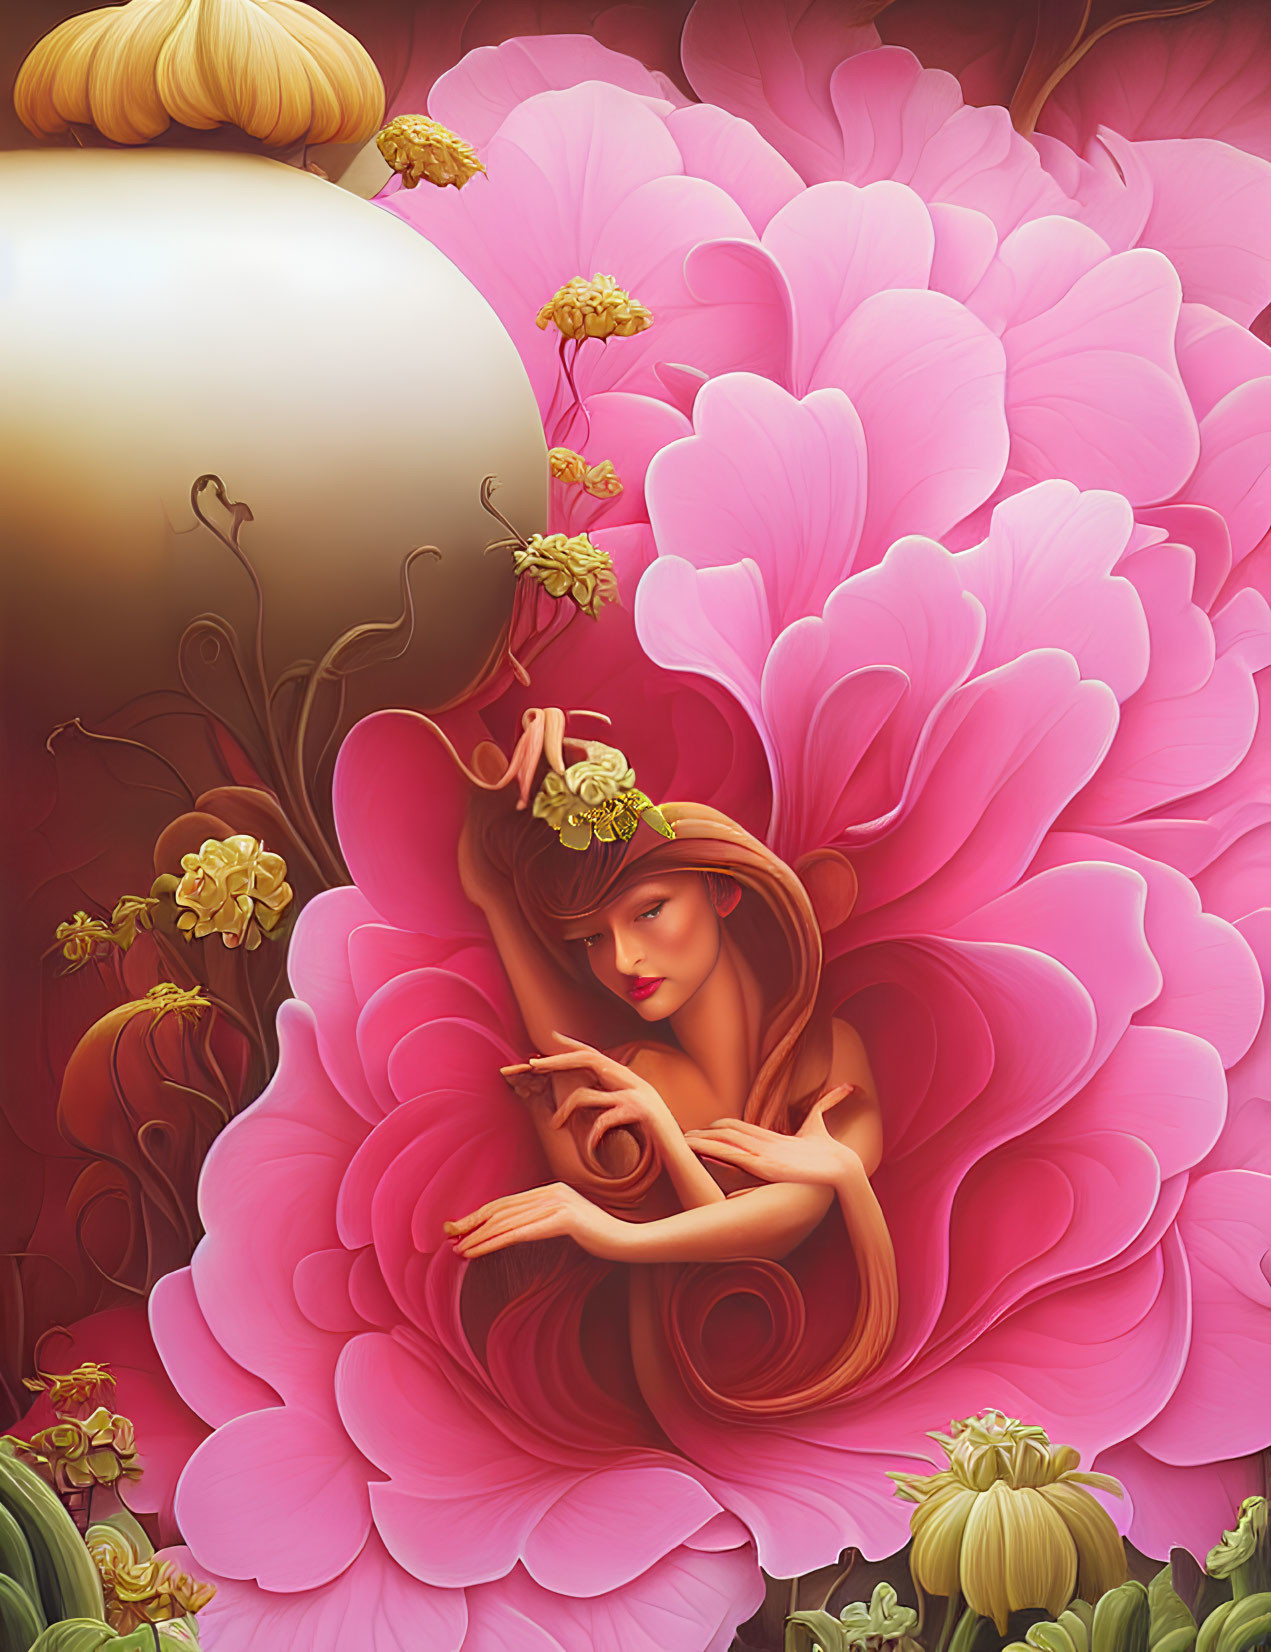 Stylized woman with flowing hair in vibrant pink floral background